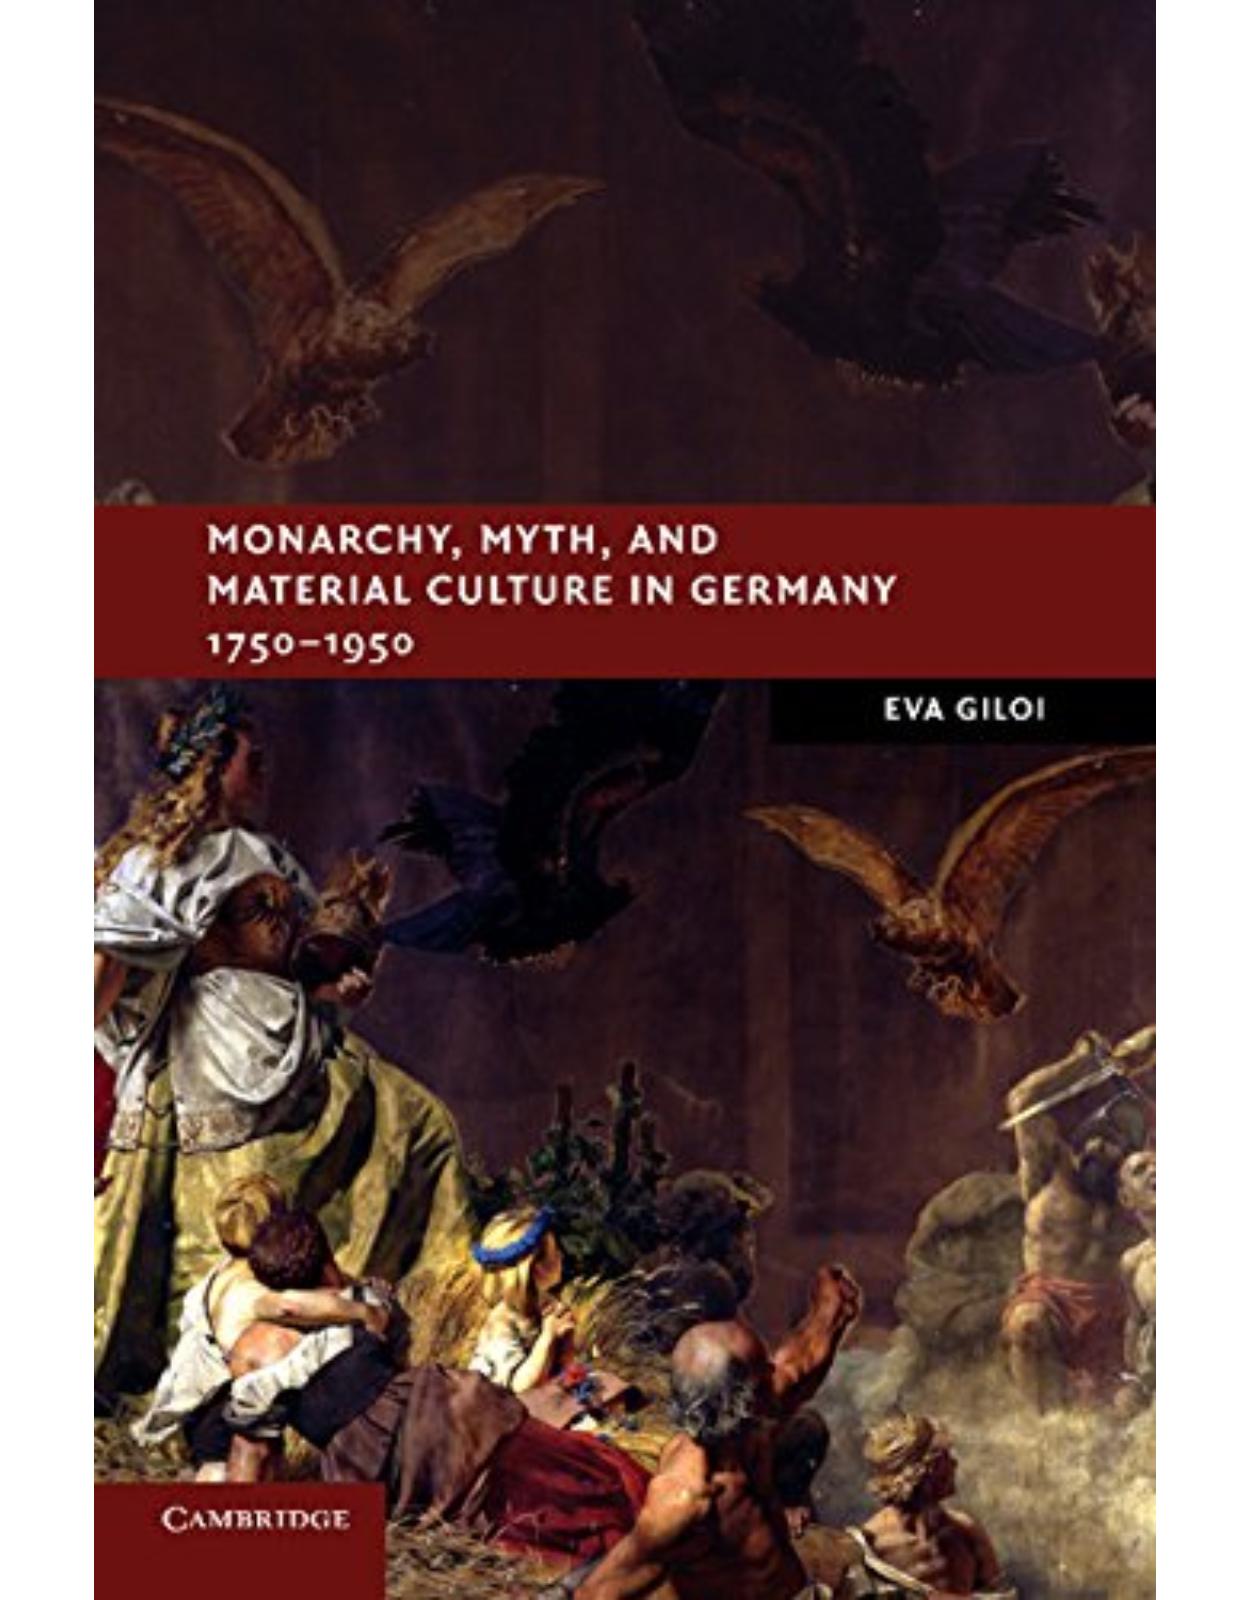 Monarchy, Myth, and Material Culture in Germany 1750-1950 (New Studies in European History)